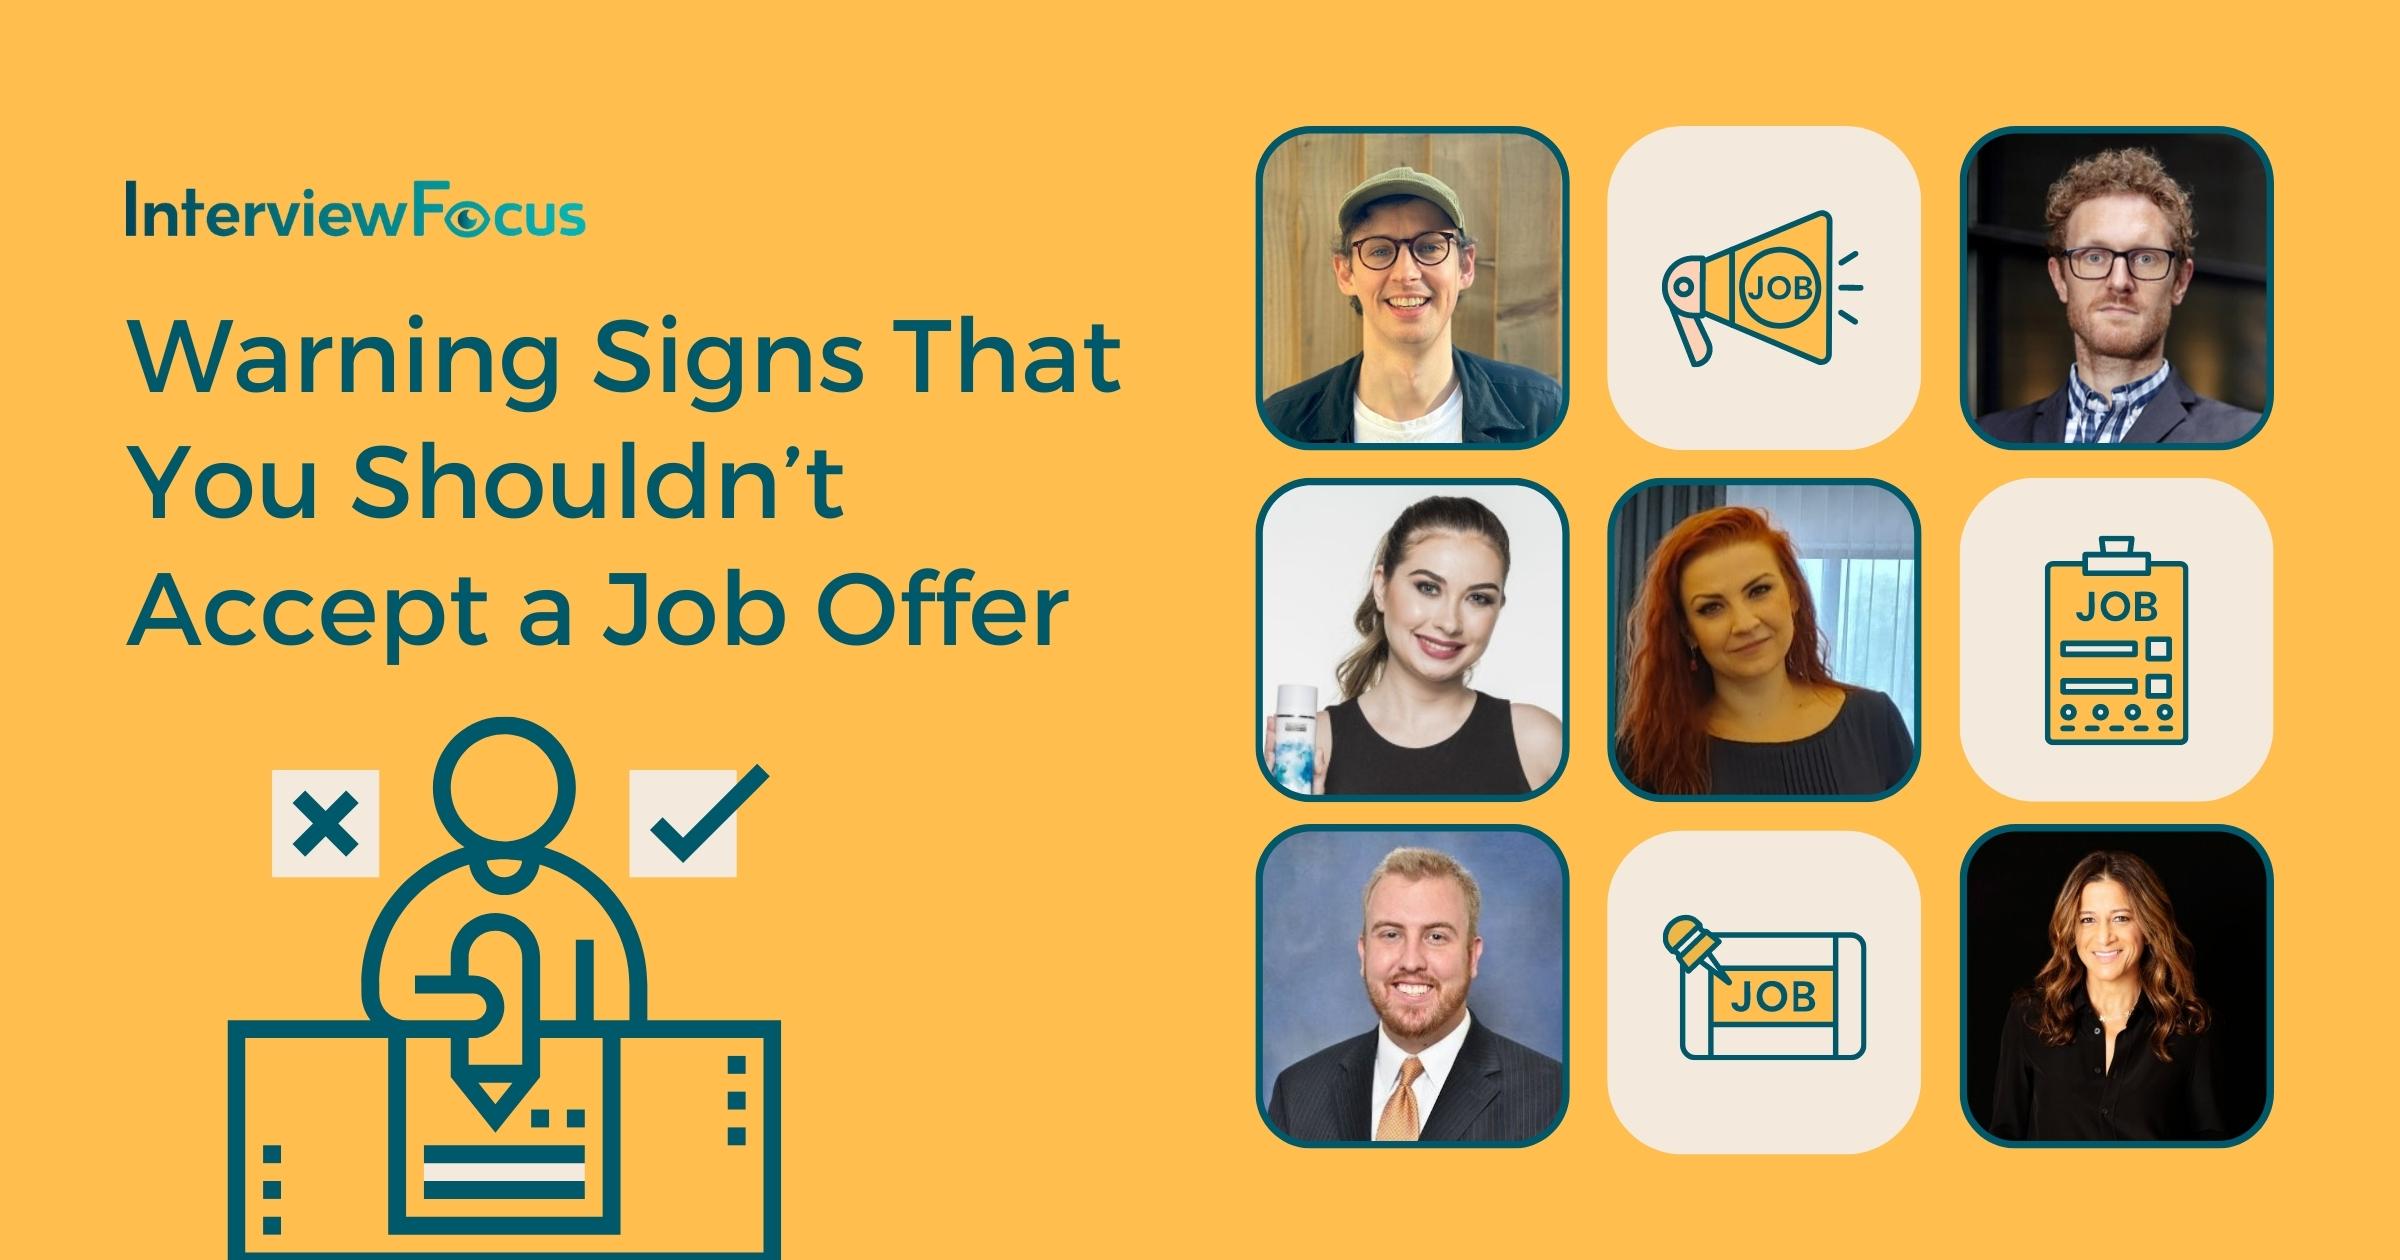 10 Warning Signs That You Shouldn’t Accept a Job Offer